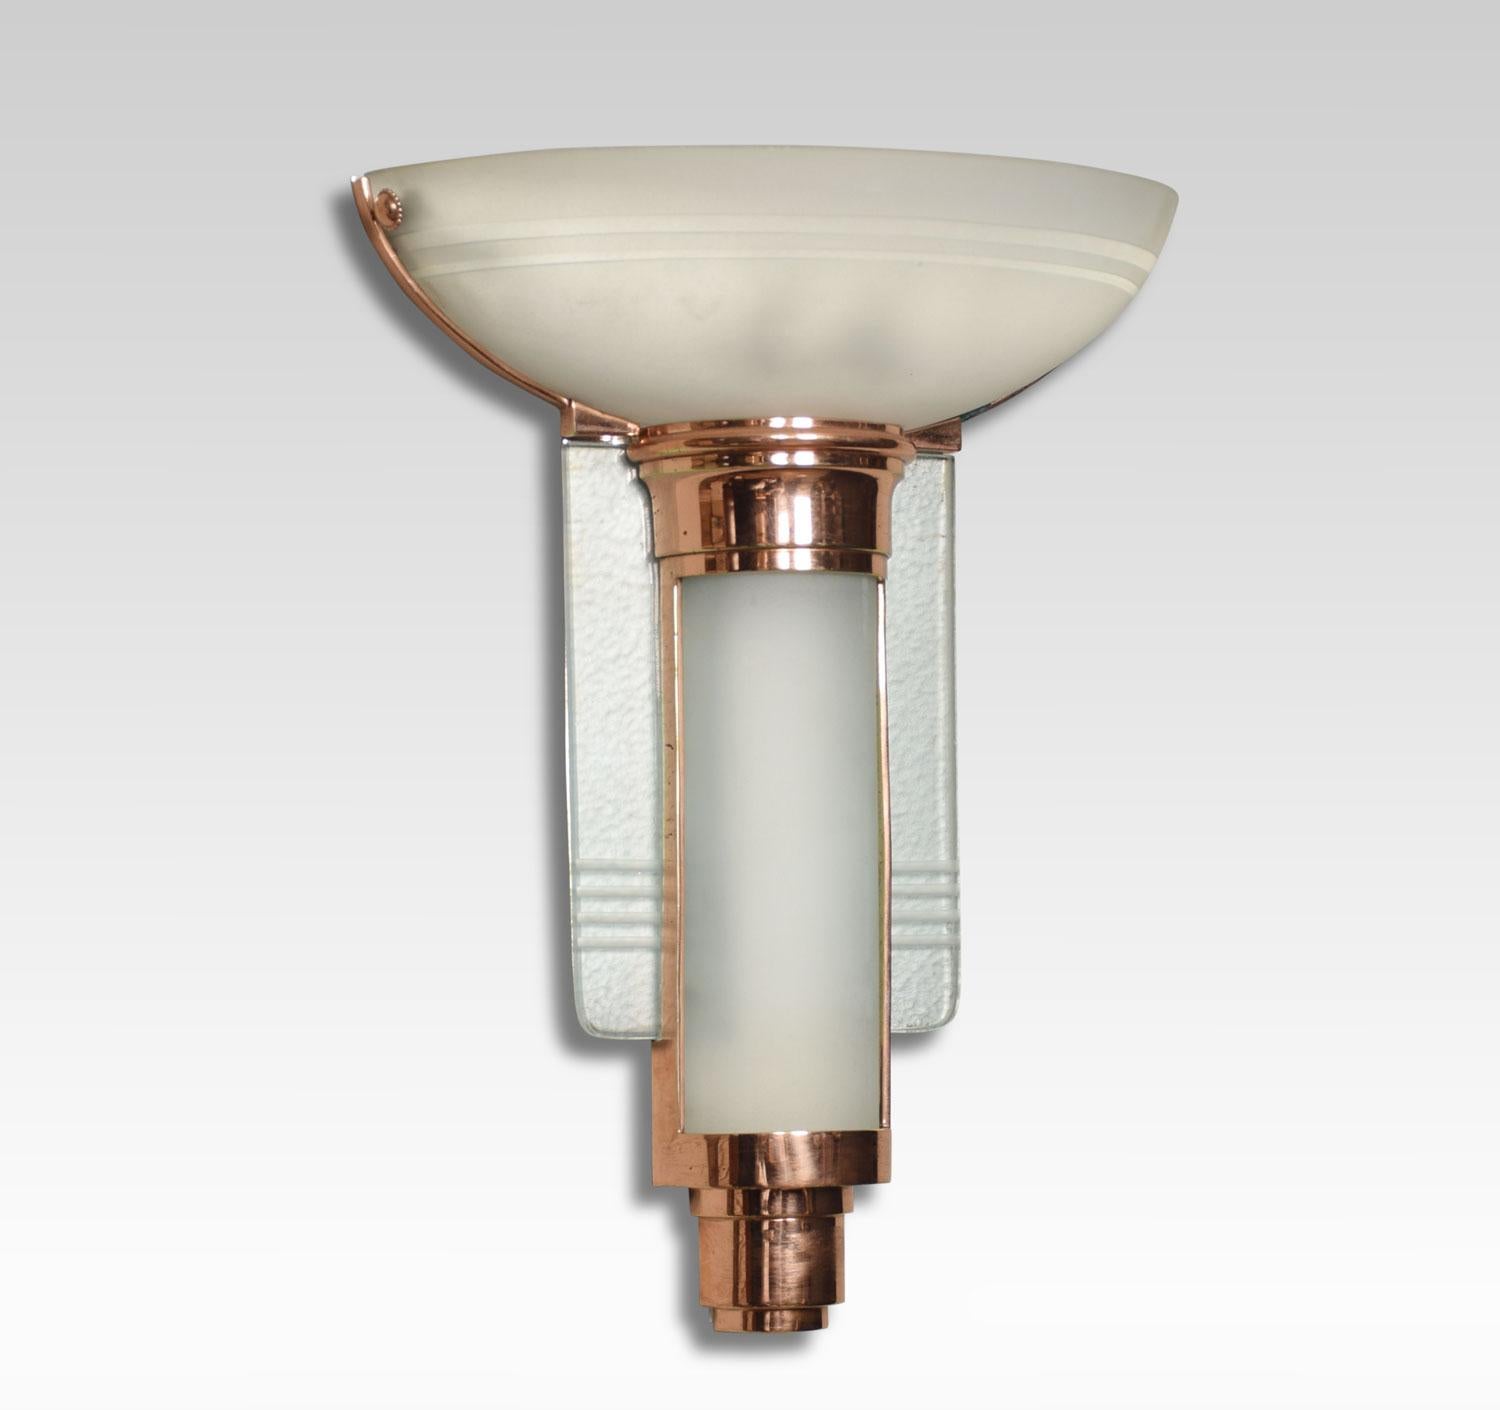 Set of three Art Deco wall lights with copper frames having inset curved and cut-glass.
Dimensions:
Height 15.5 inches
Width 11.5 inches
Depth 6.5 inches.